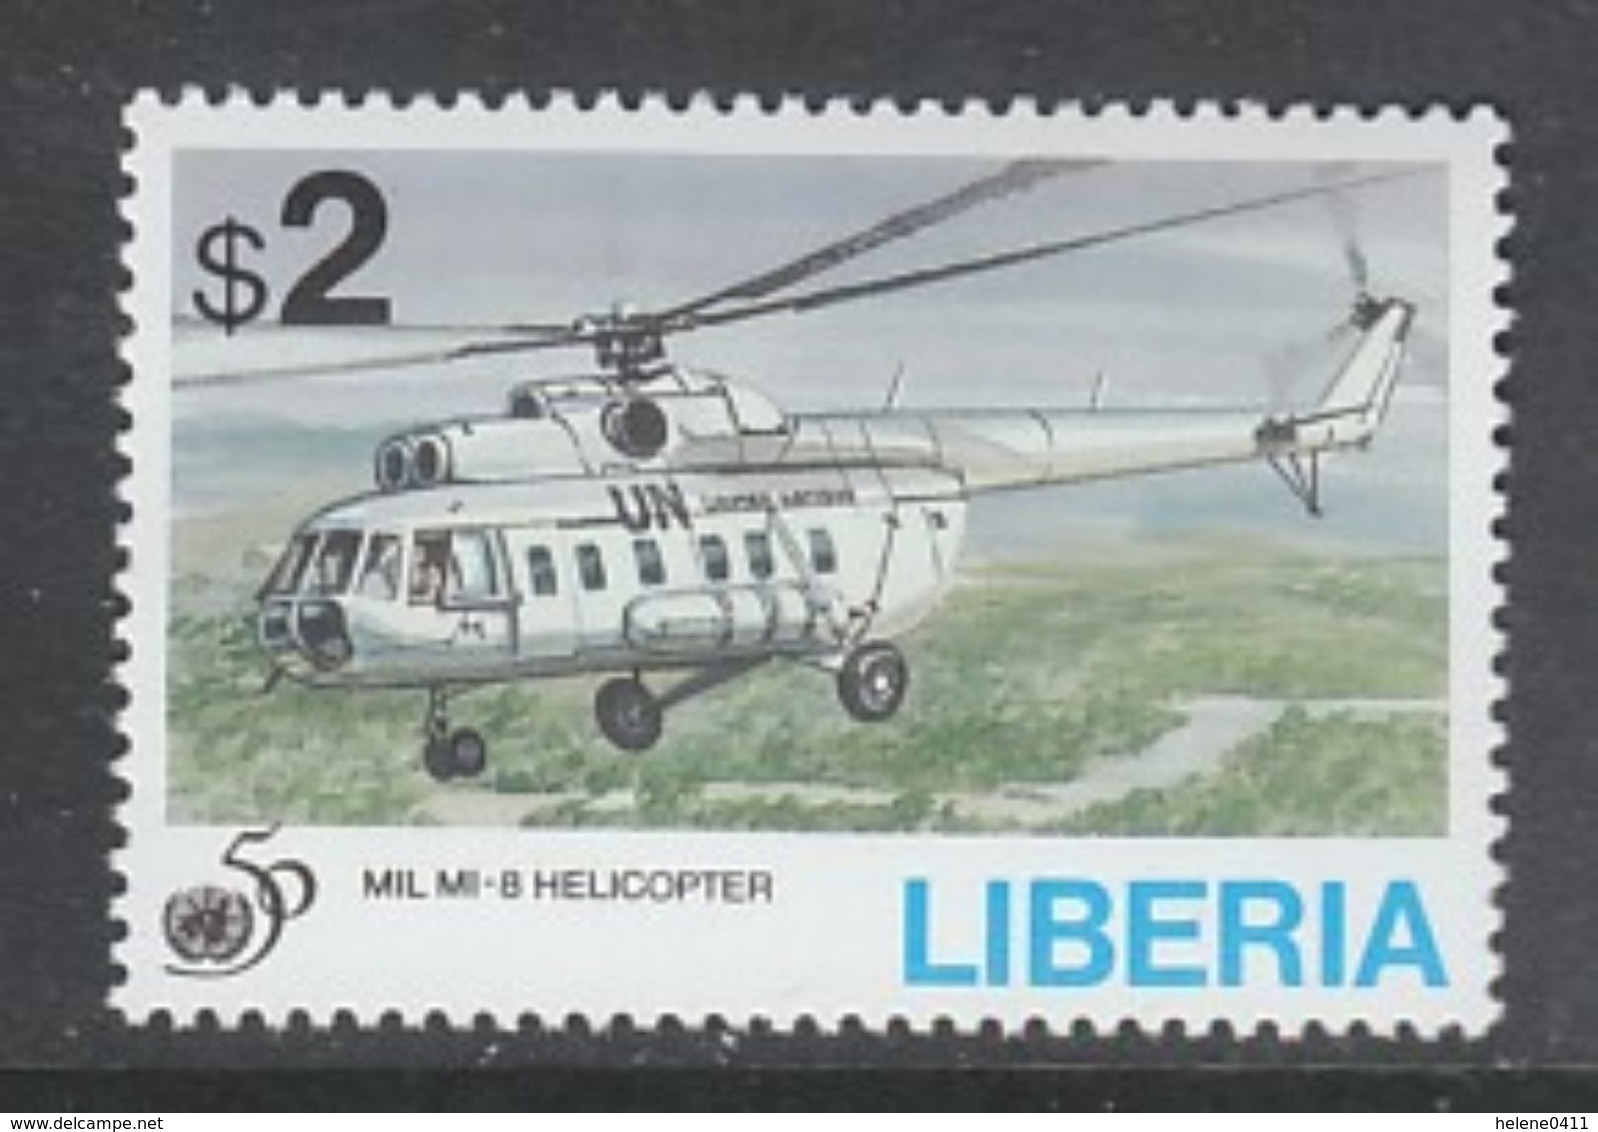 TIMBRE NEUF DU LIBERIA - HELICOPTERE MIL MI-8 (50E ANNIVERSAIRE DES NATIONS UNIES) N° Y&T 1298 - Helicopters